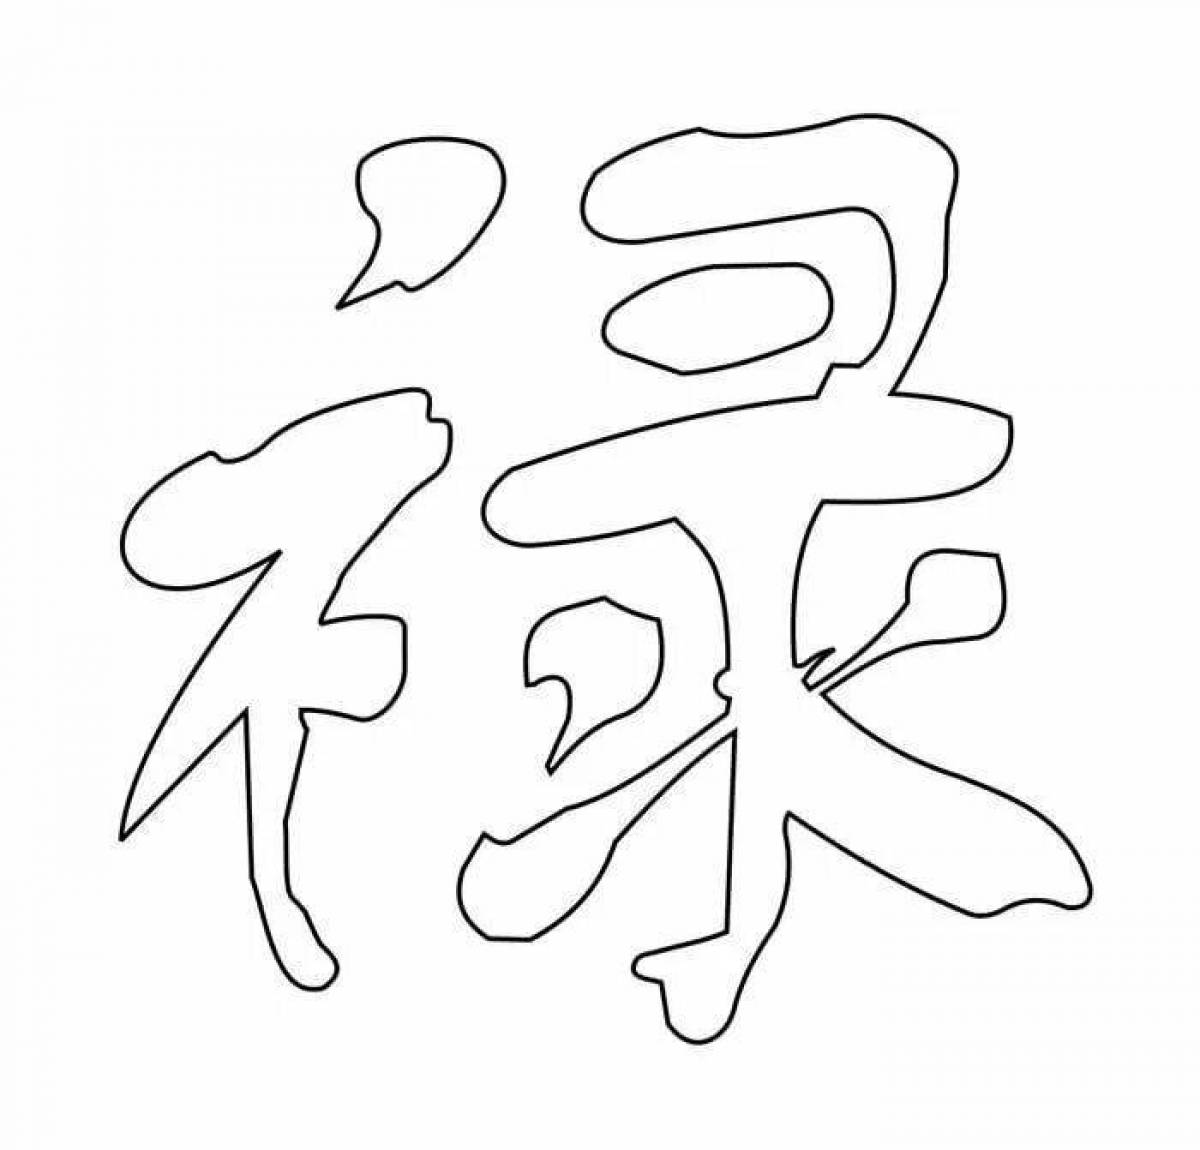 Chinese characters creative coloring page